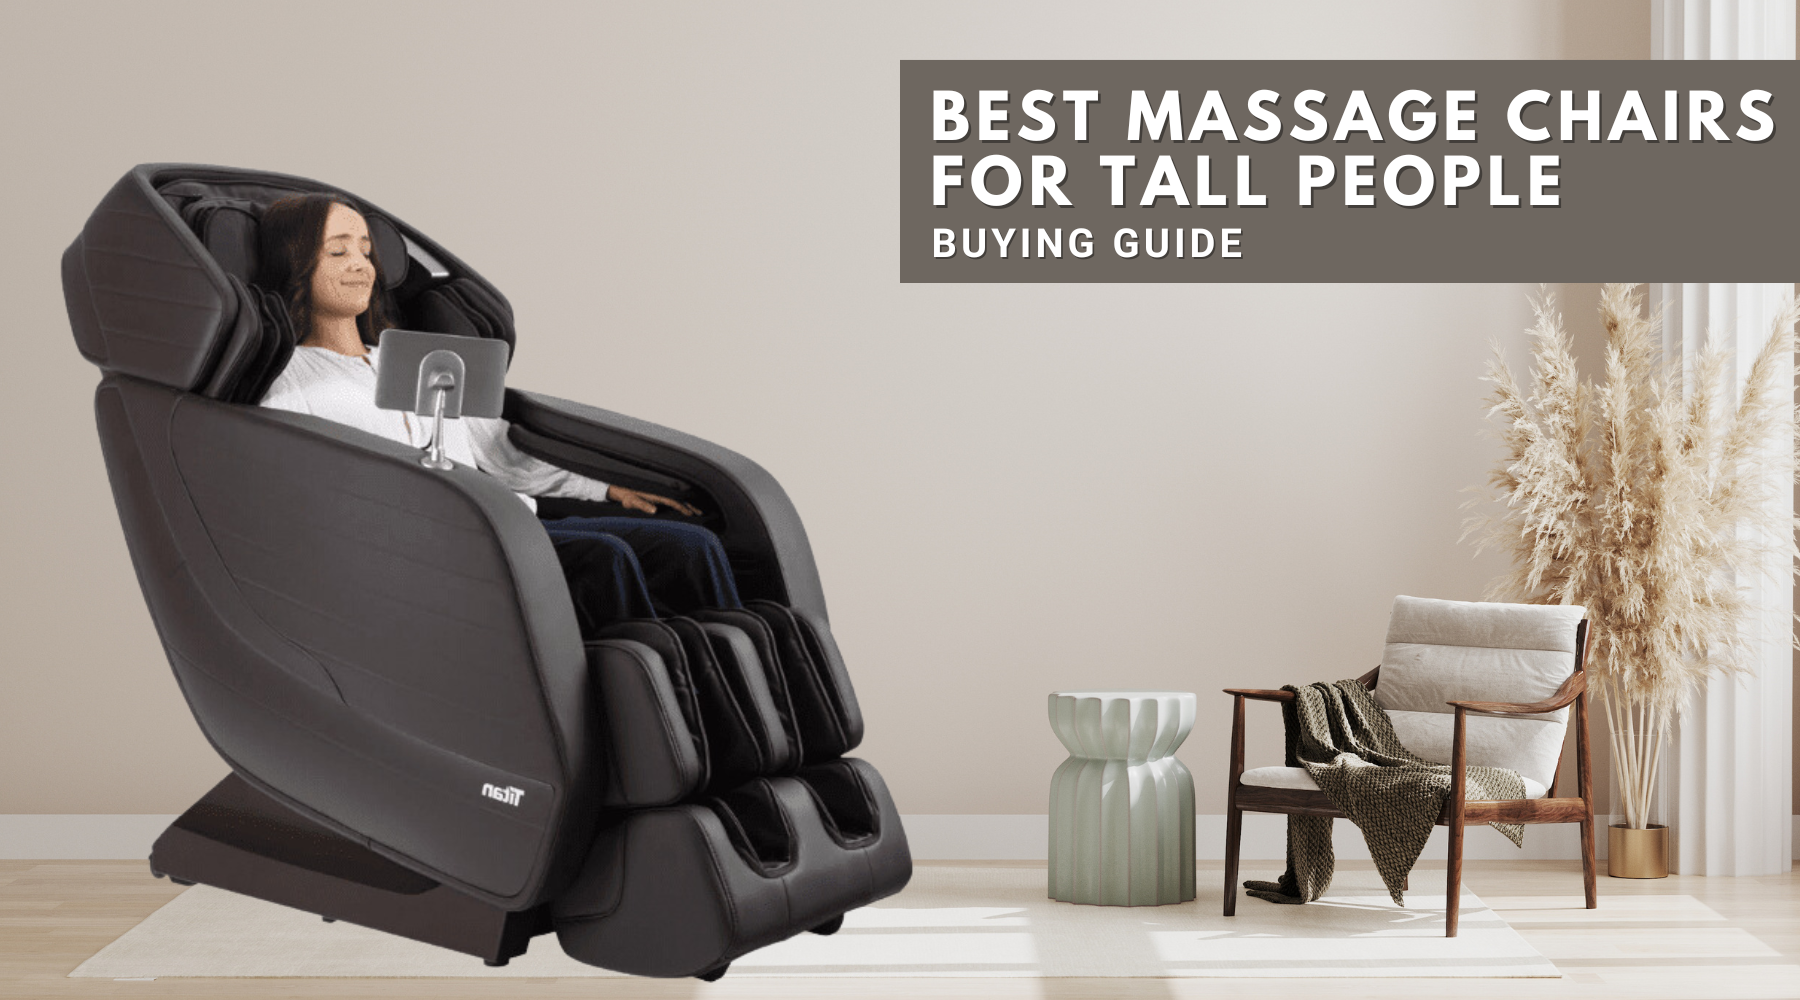 Big & Tall massage chairs are designed with Convenience, and Versatility to give well-fitted massages for the whole family. 